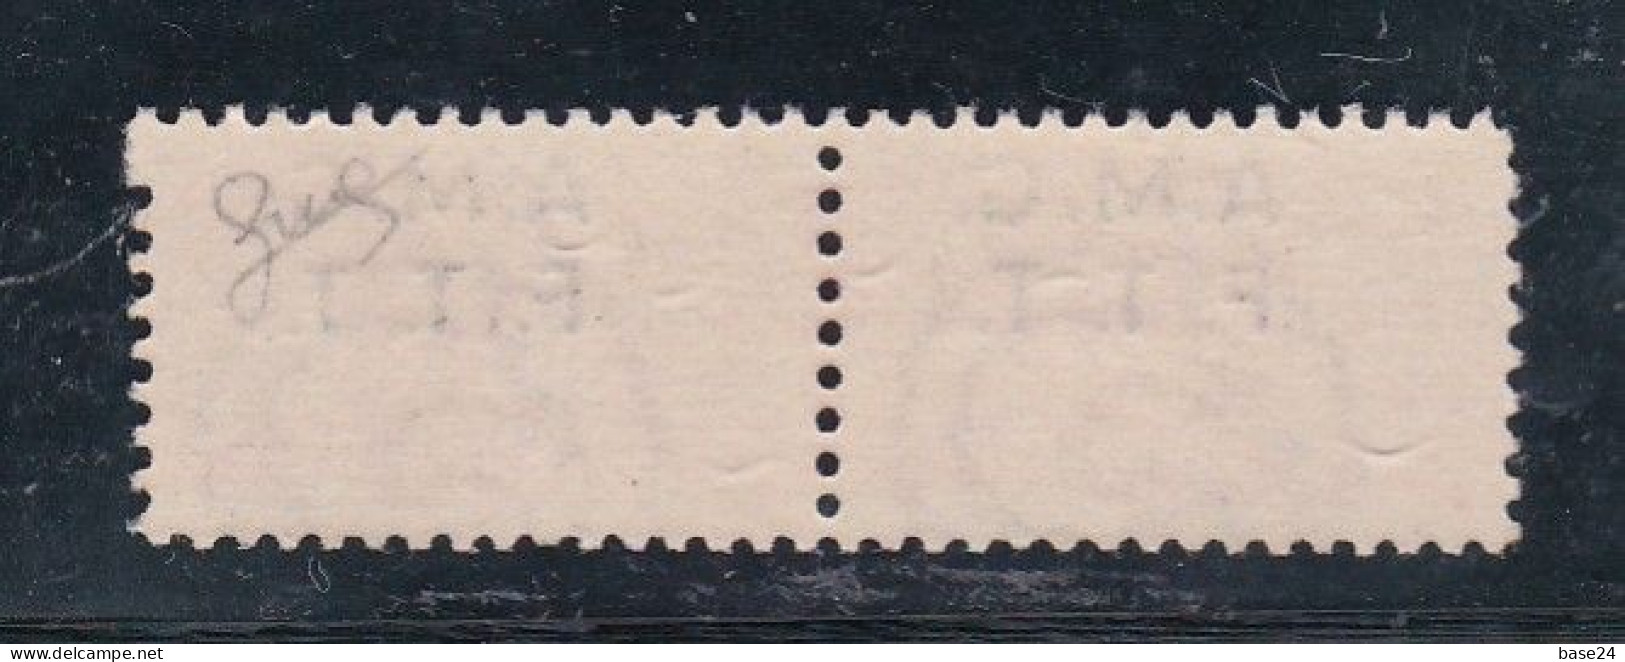 1947 Italia Italy Trieste A  PACCHI POSTALI 50 Lire Rosso Varietà 8g MNH** Firma Biondi Parcel Post - Postal And Consigned Parcels